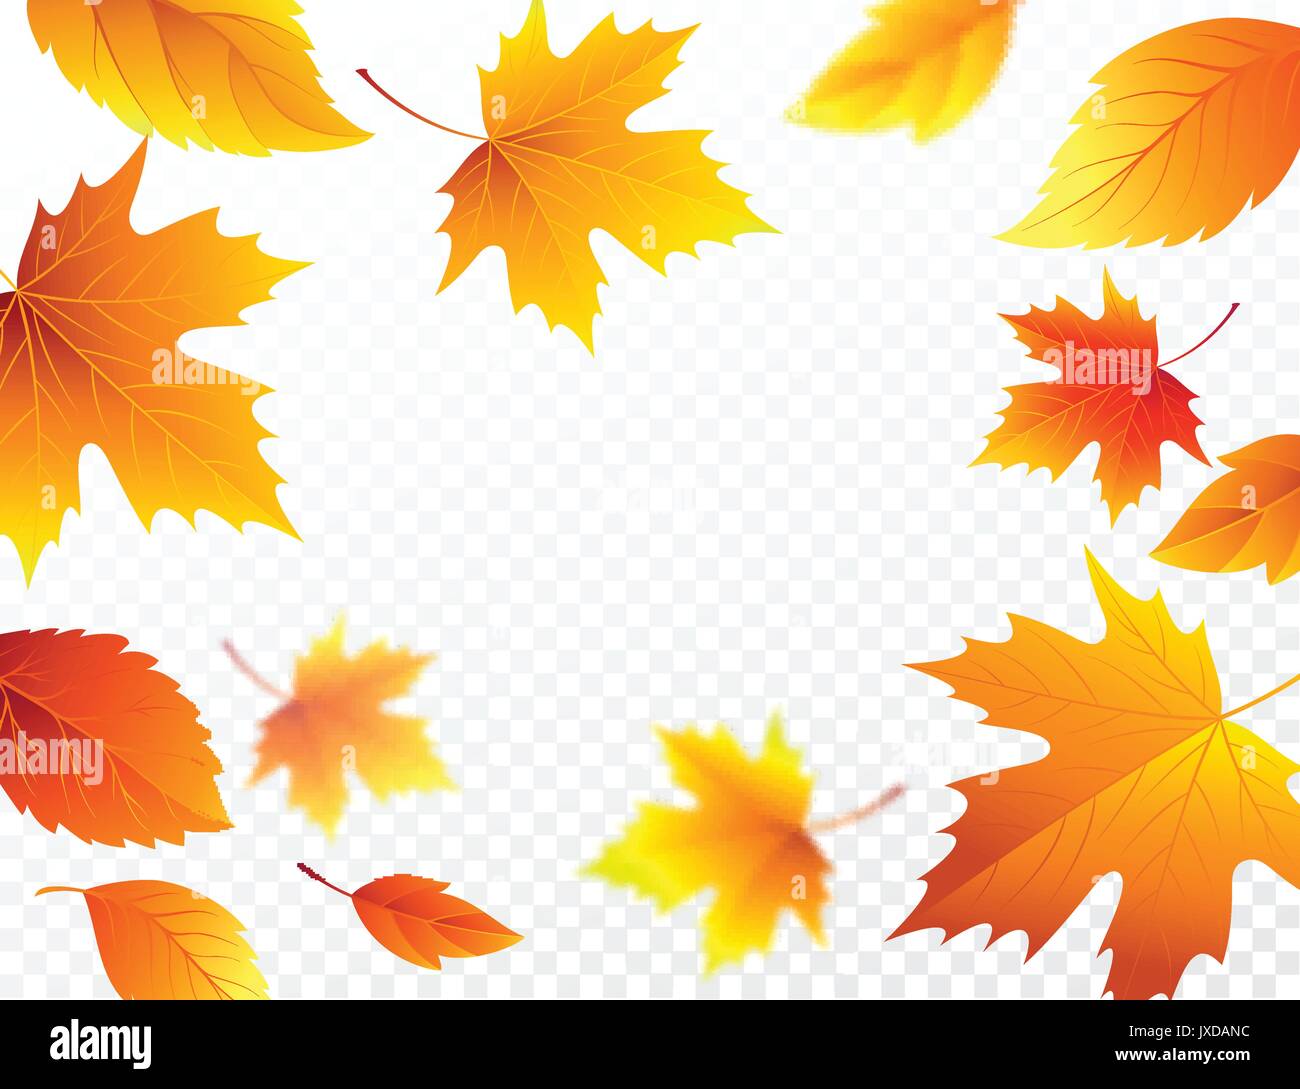 Autumn falling leaves on transparent checkered background. Autumnal foliage fall leaf flying in wind motion blur. Vector illustration Stock Vector